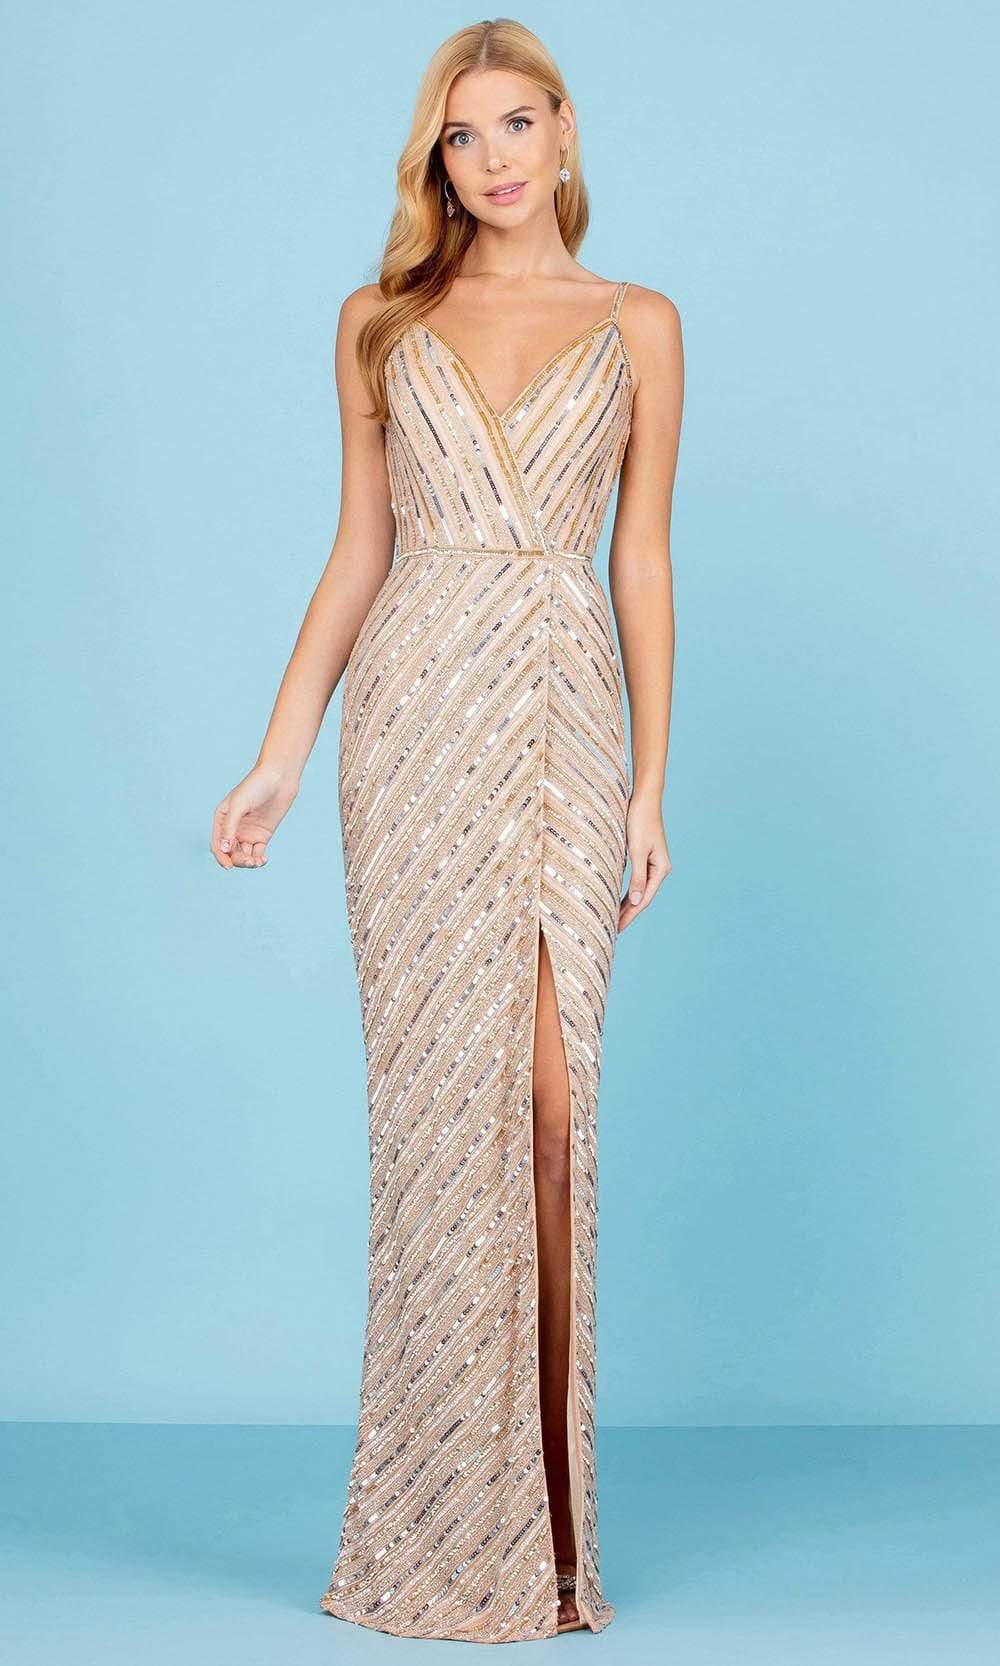 SCALA - 60258 Striped Sequin V-Neck Gown
